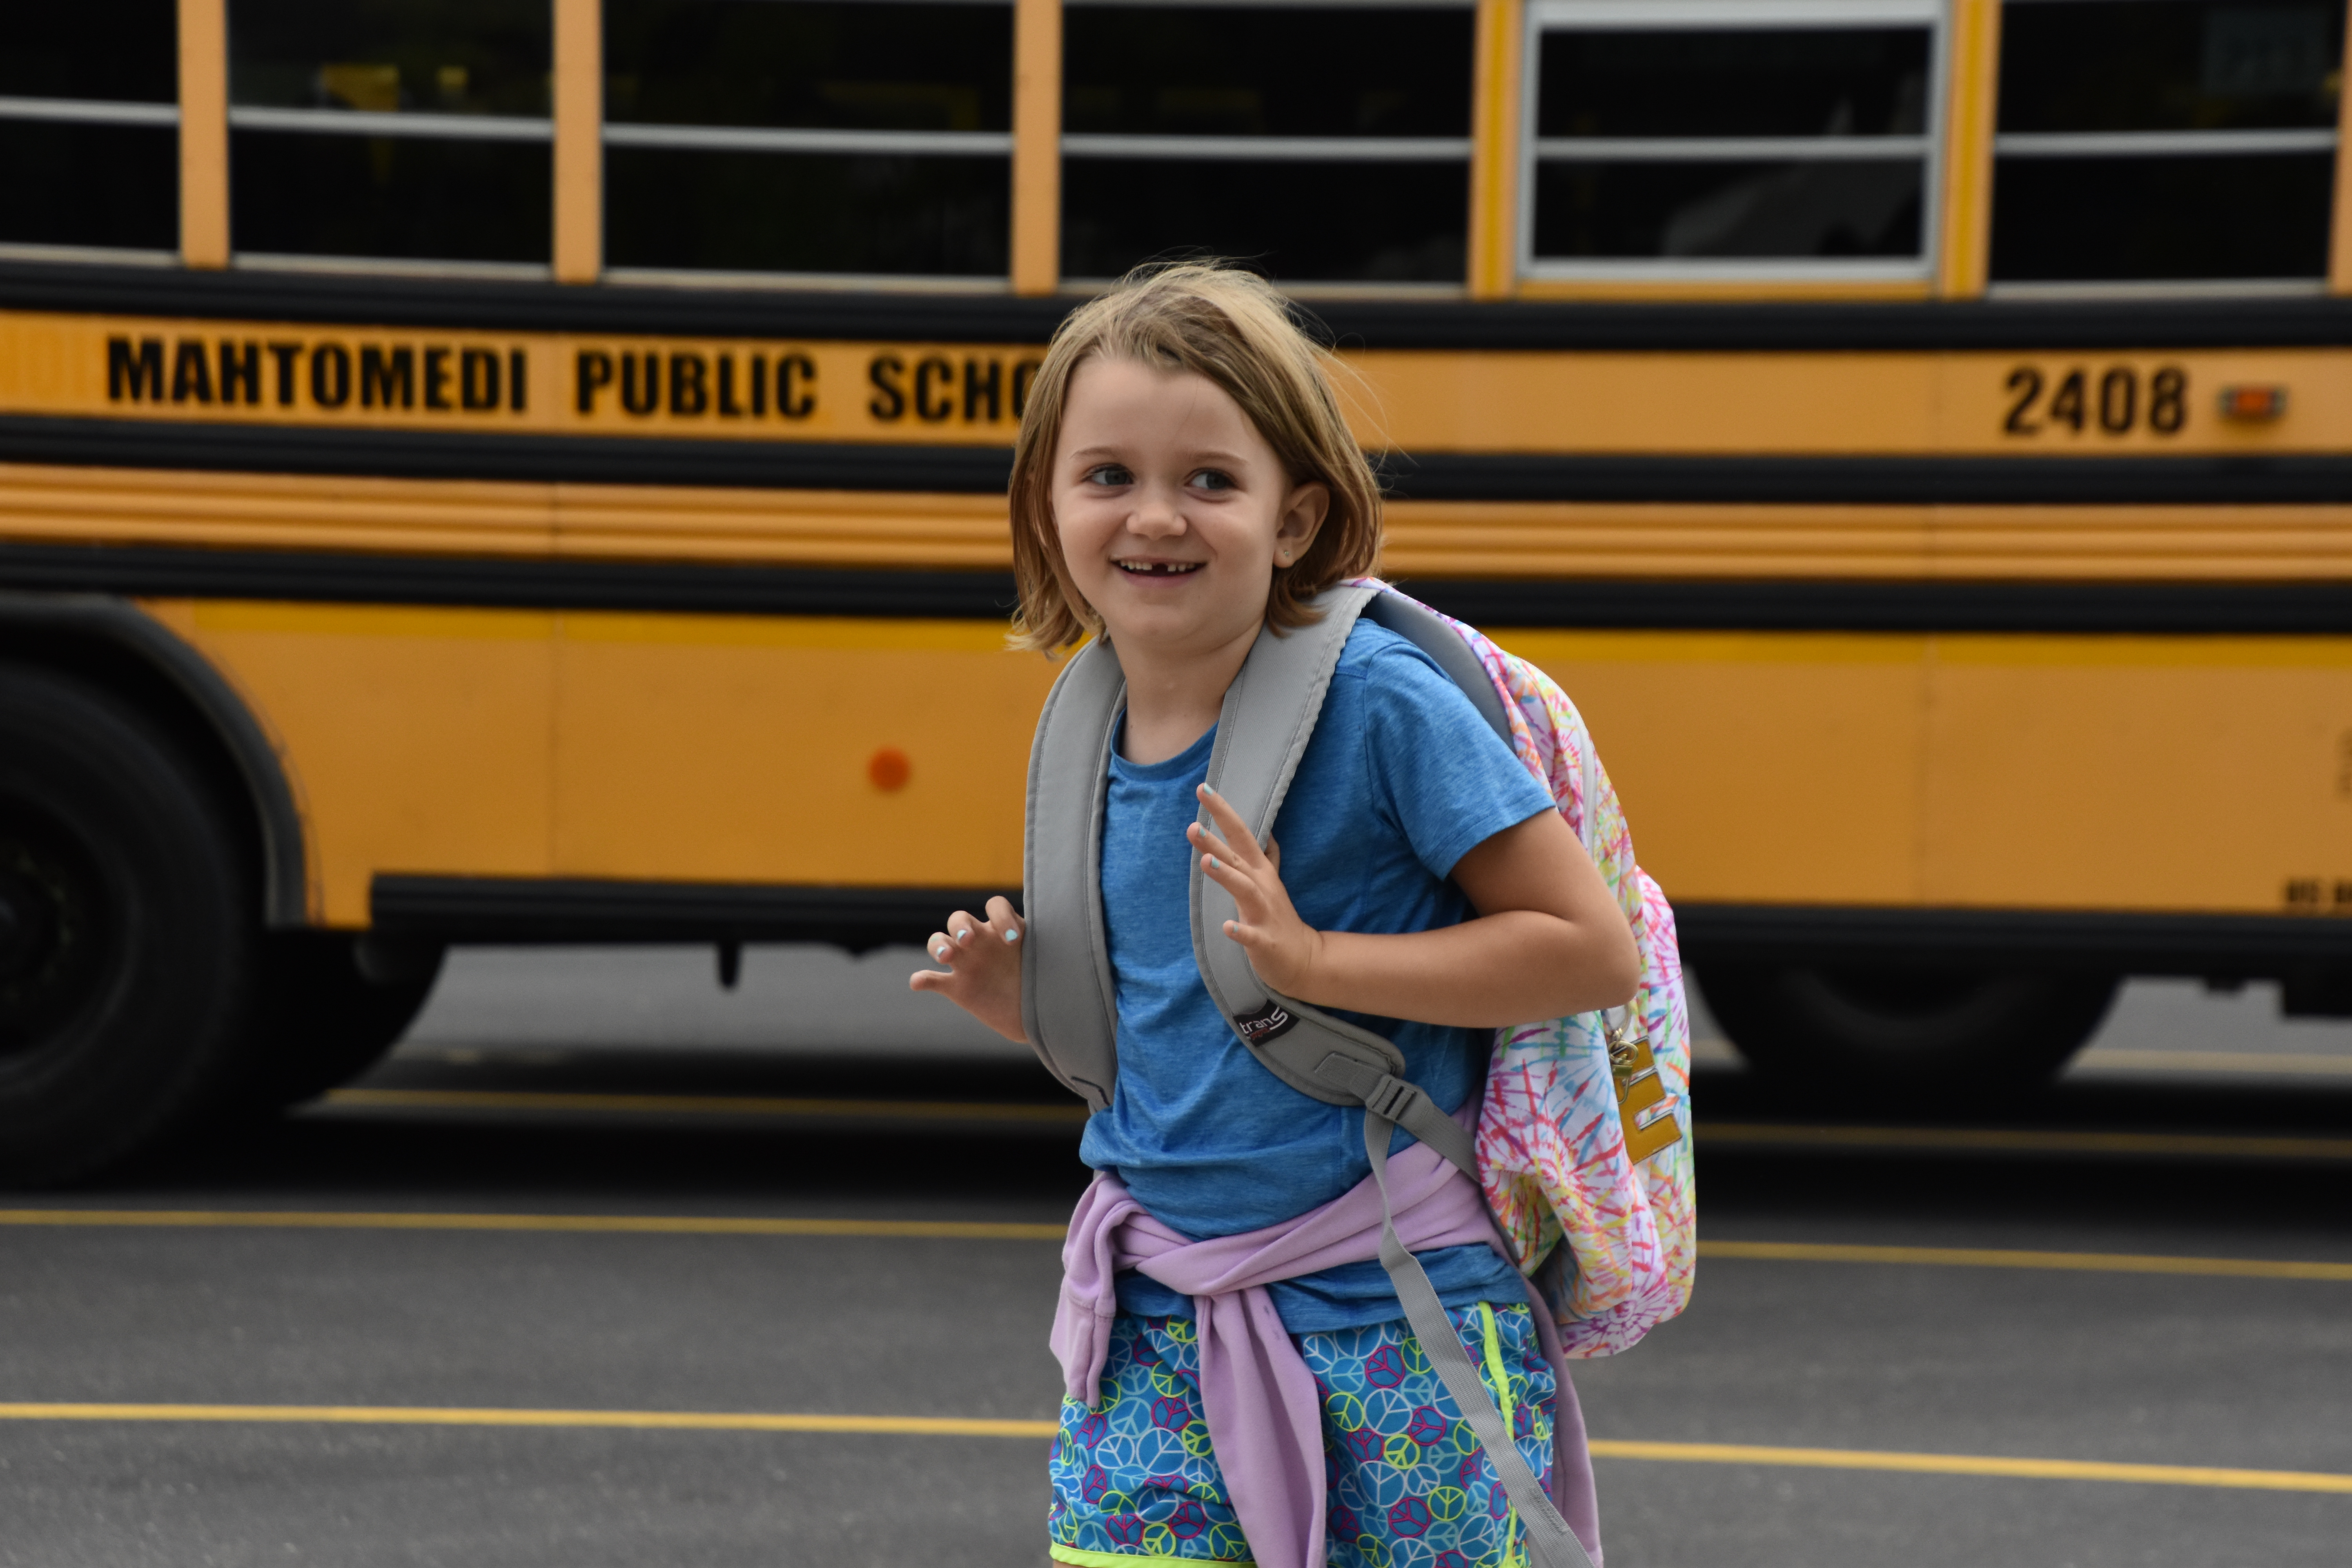 Student smiling by a school bus